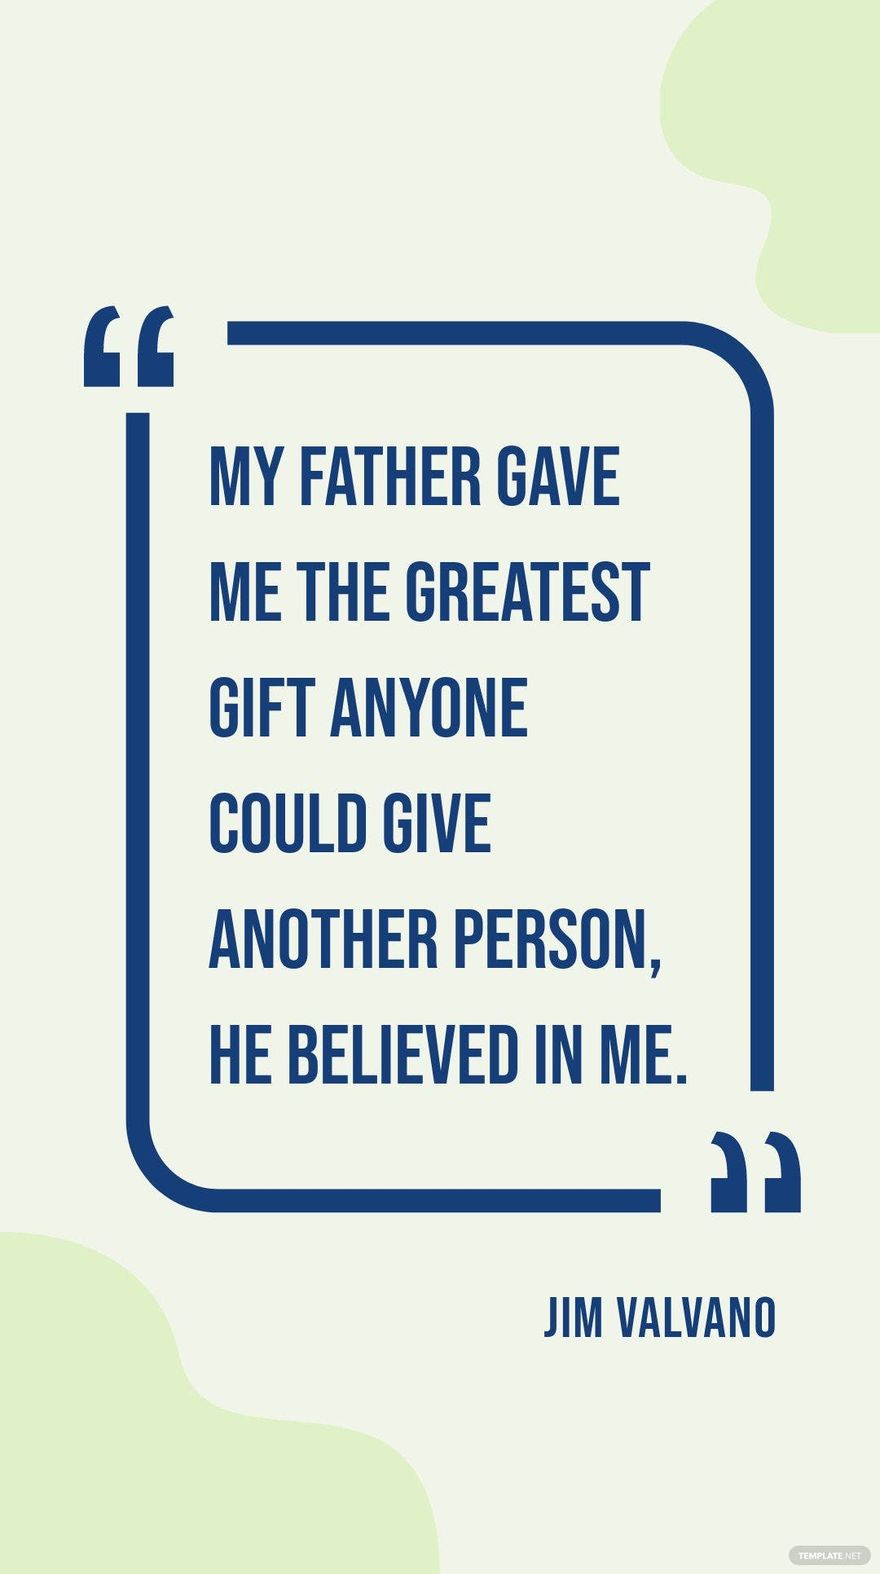 Free Jim Valvano - My father gave me the greatest gift anyone could give another person, he believed in me. in JPG